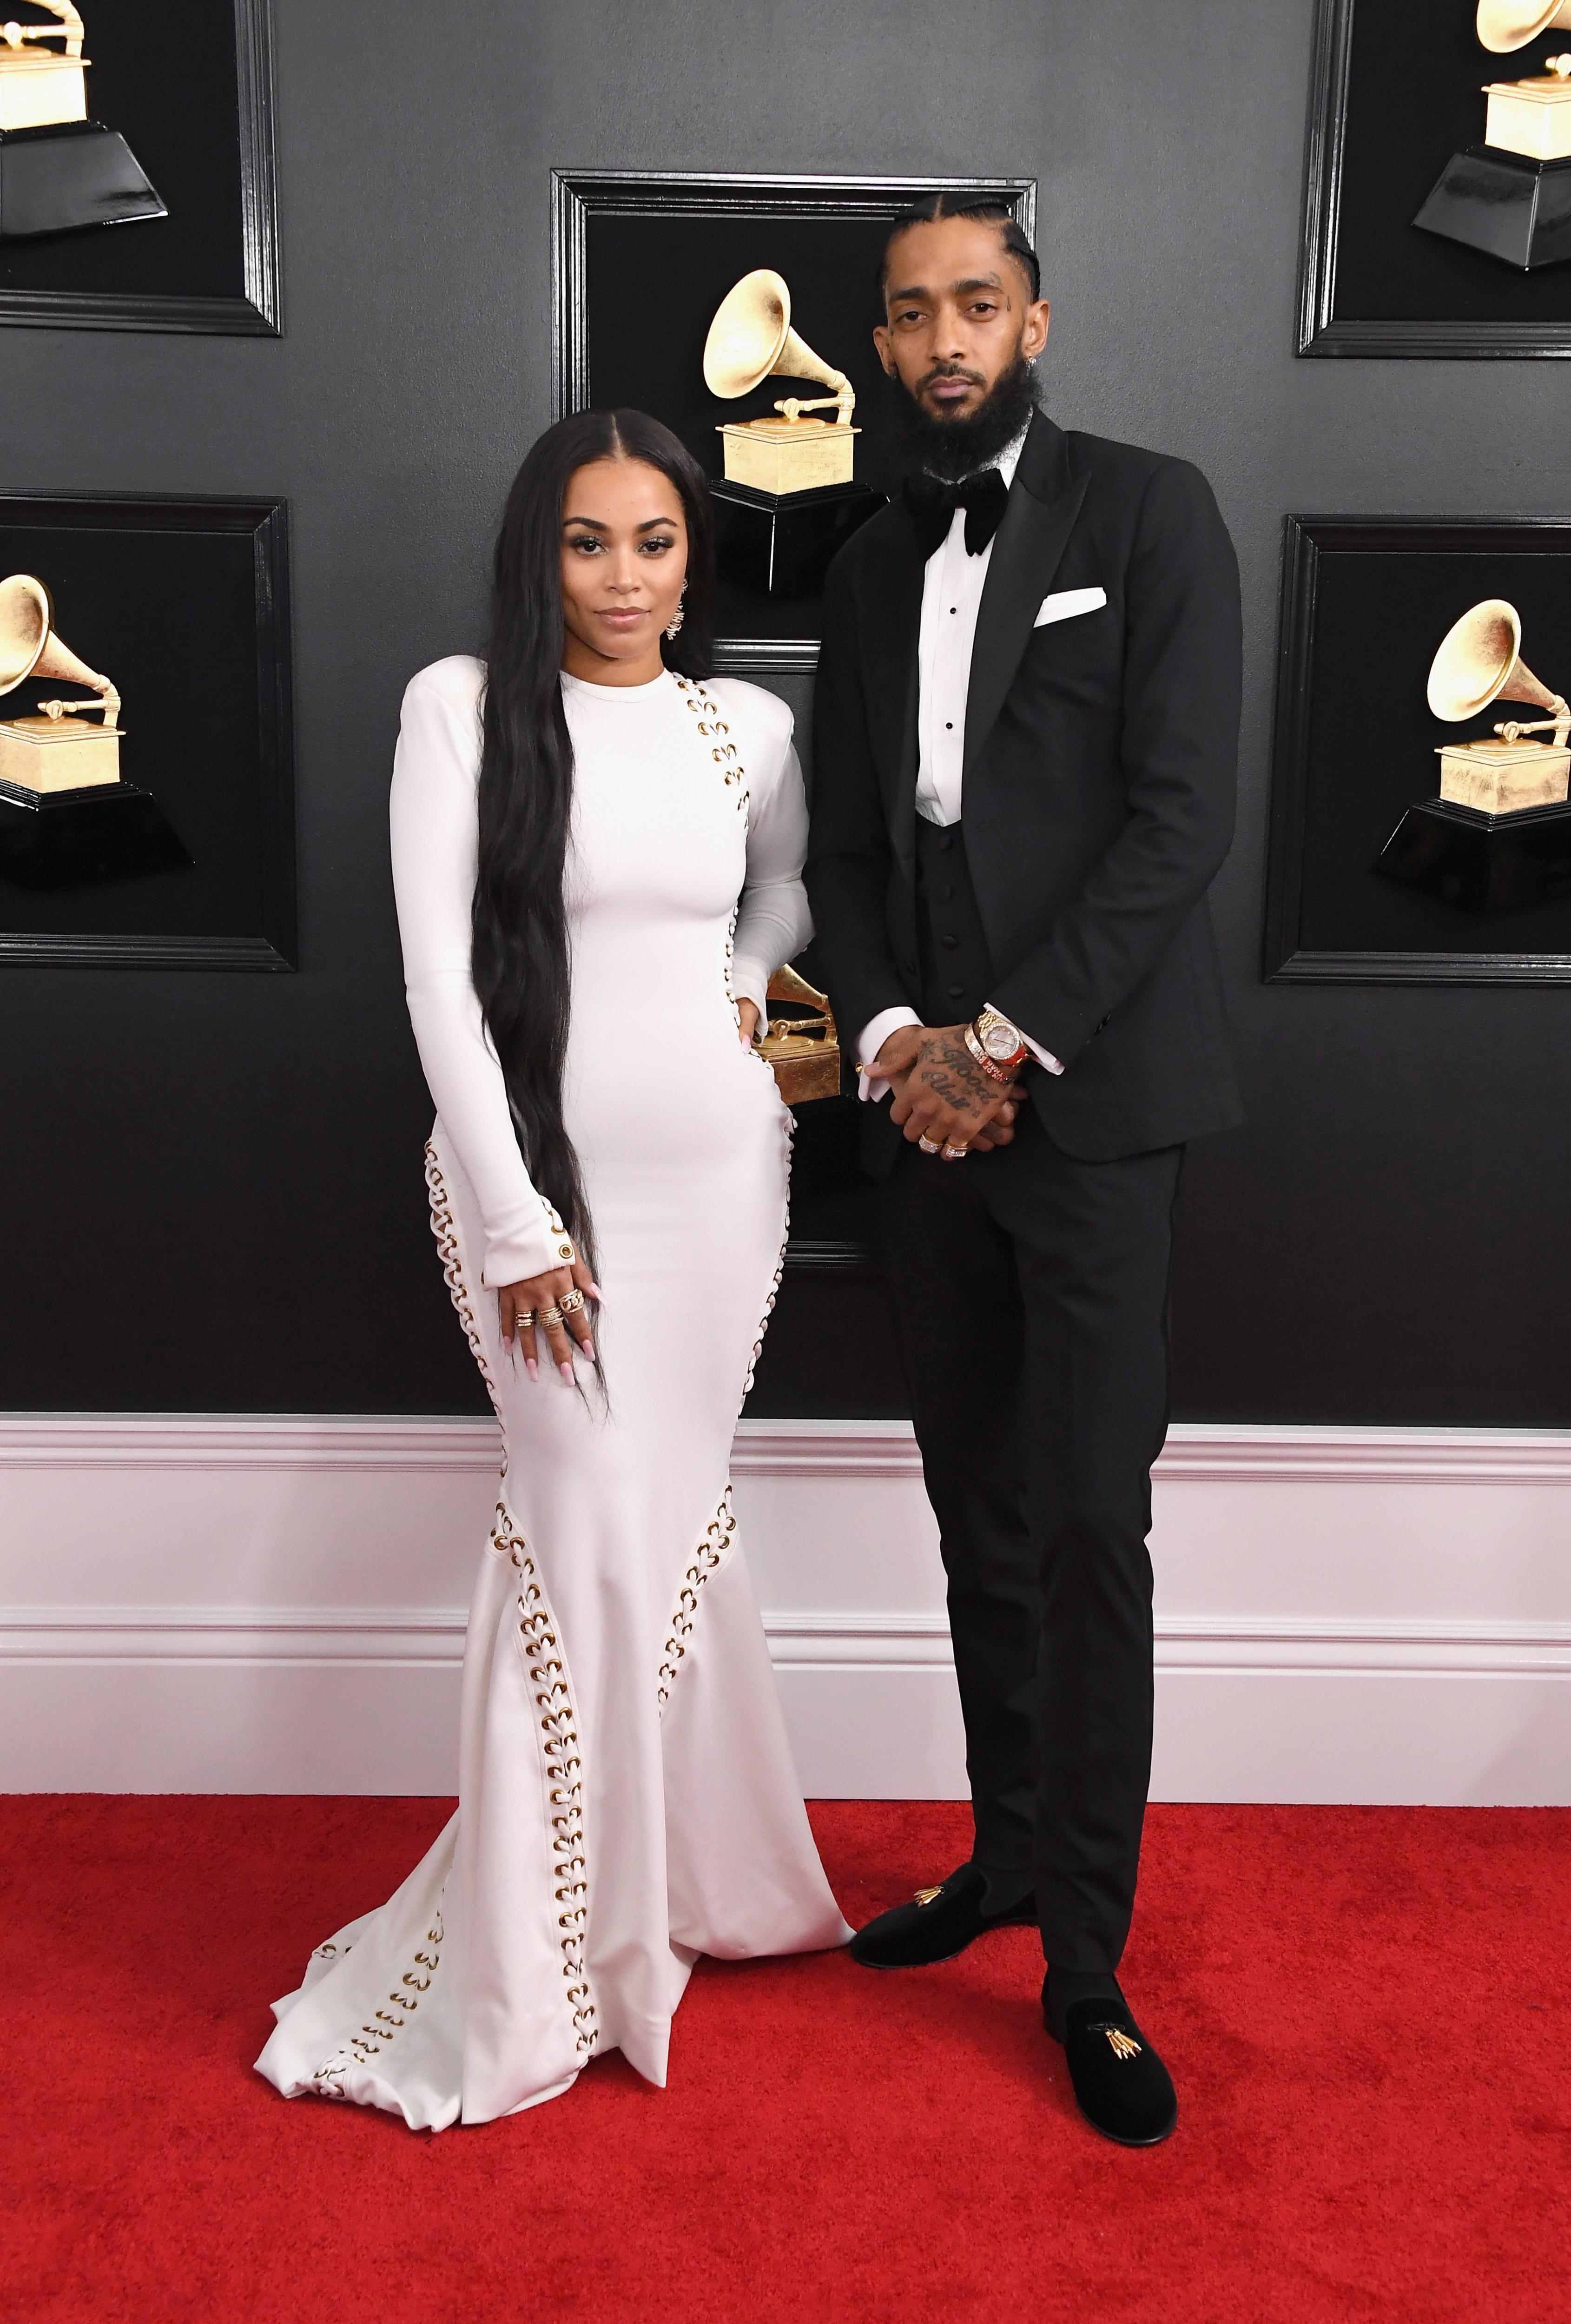 Nipsey Hussles Memorial Service Had Powerful Statements From Barack Obama, Kendrick Lamar and More GRAMMY